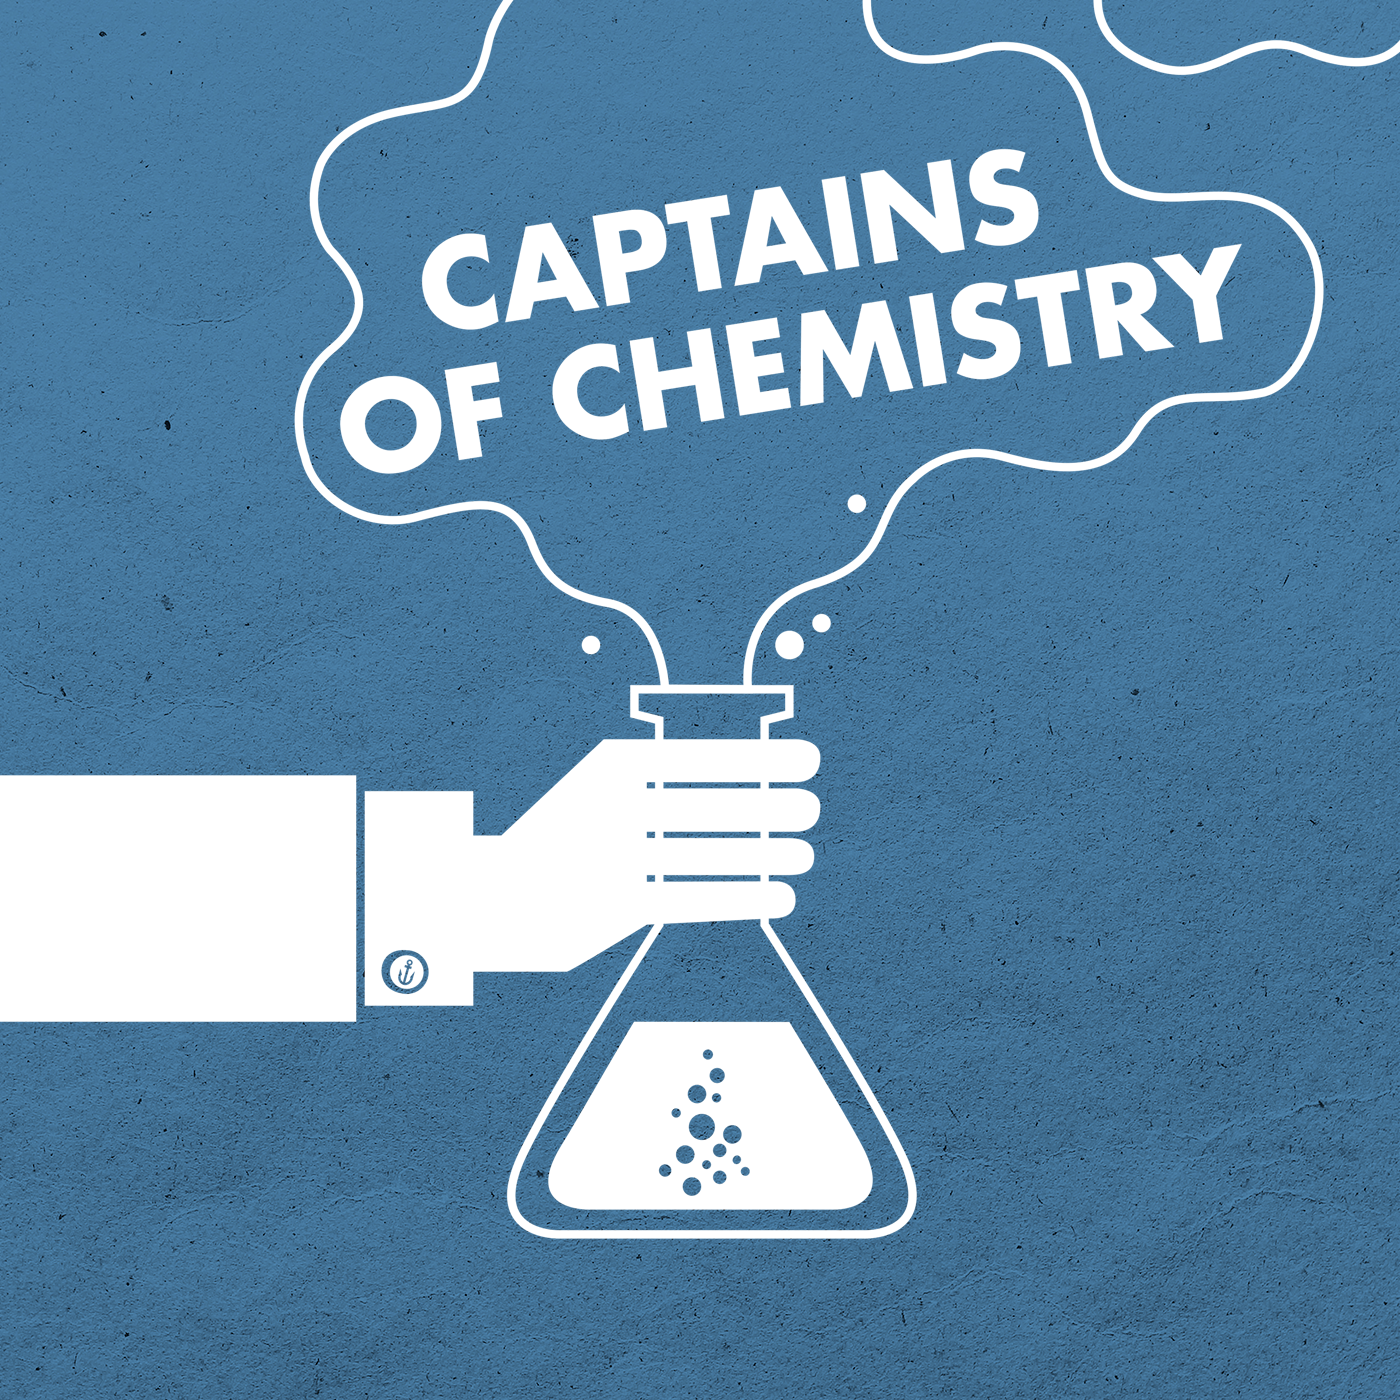 Captains of Chemistry